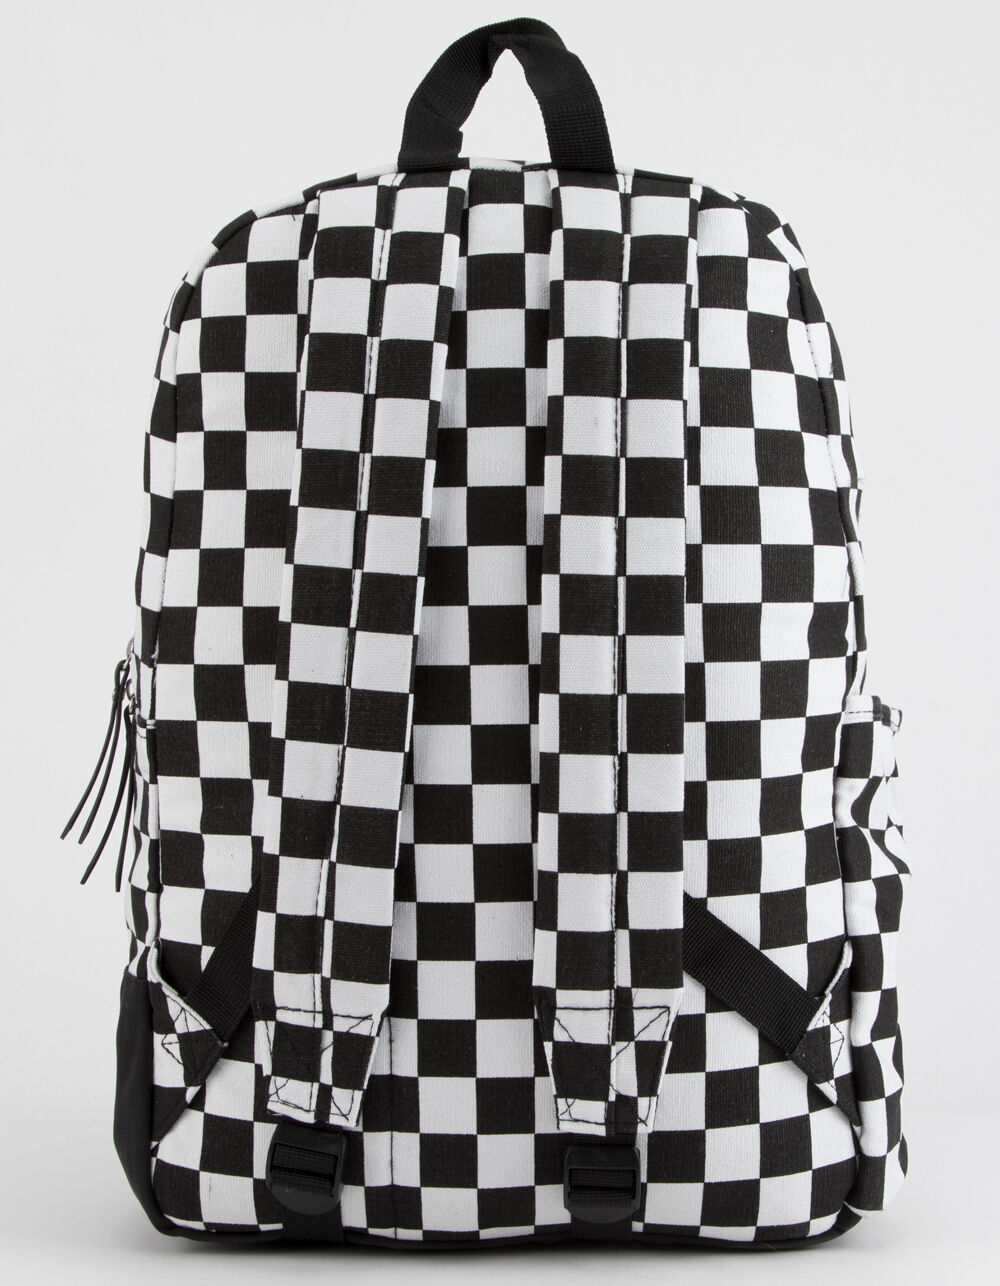 DICKIES Colton Checkered Backpack - BLACK/WHITE | Tillys